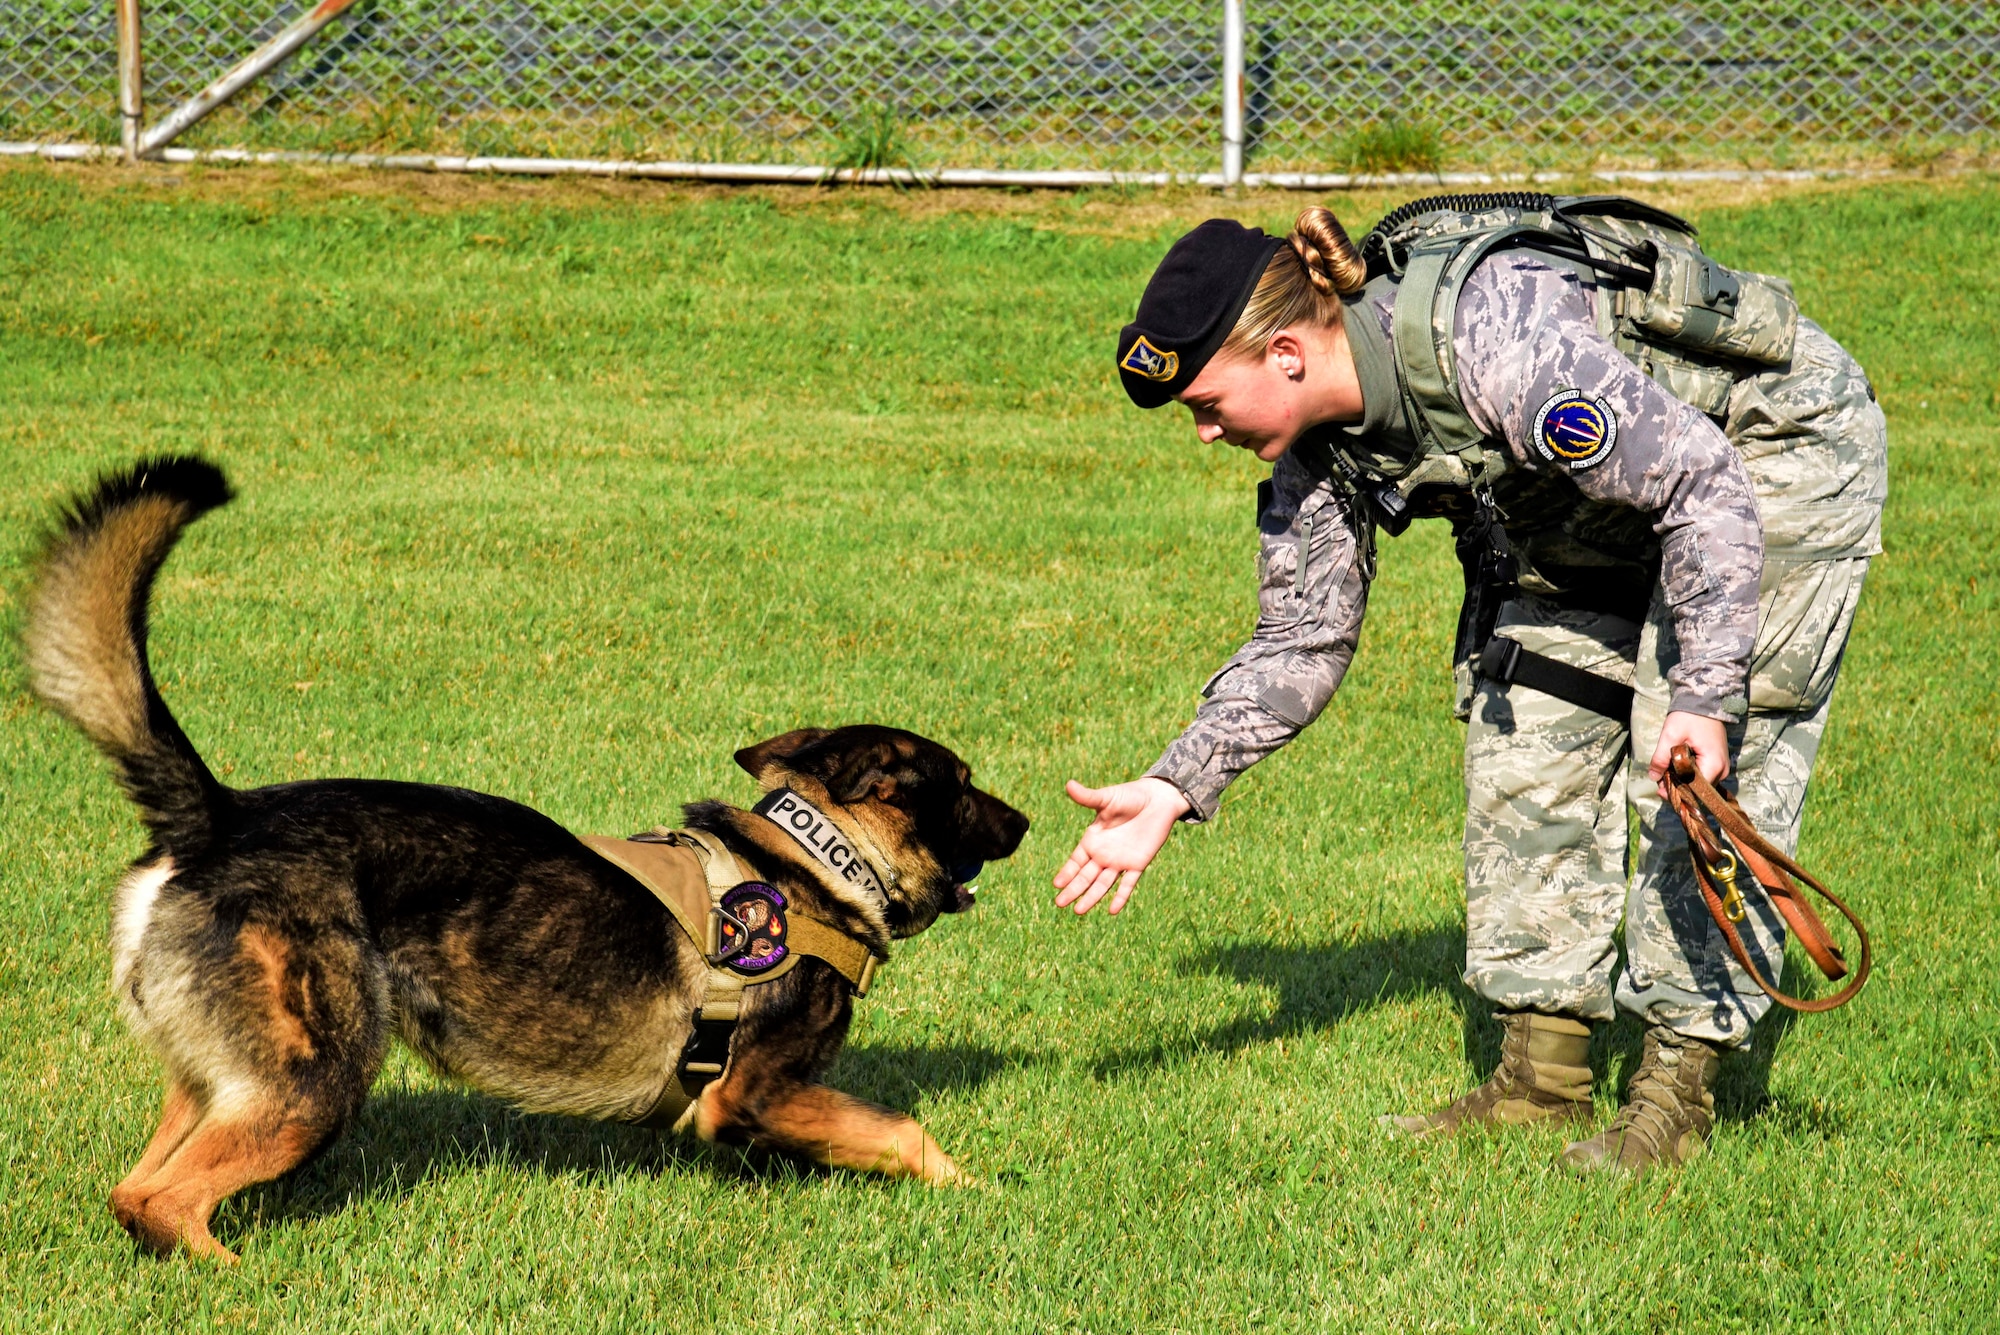 U.S. Air Force Senior Airman Alyssa Stamps, 35th Security Forces Squadron military working dog handler, plays with her dog, Elvis, at Misawa Air Base, Japan, Sept. 23, 2015. To become an MWD handler, Stamps was required to work as an entry-level security forces Airman for at least two years and meet with her previous duty station’s kennel master for approval before applying for the position. (U.S. Air Force photo by Airman 1st Class Jordyn Fetter/Released)